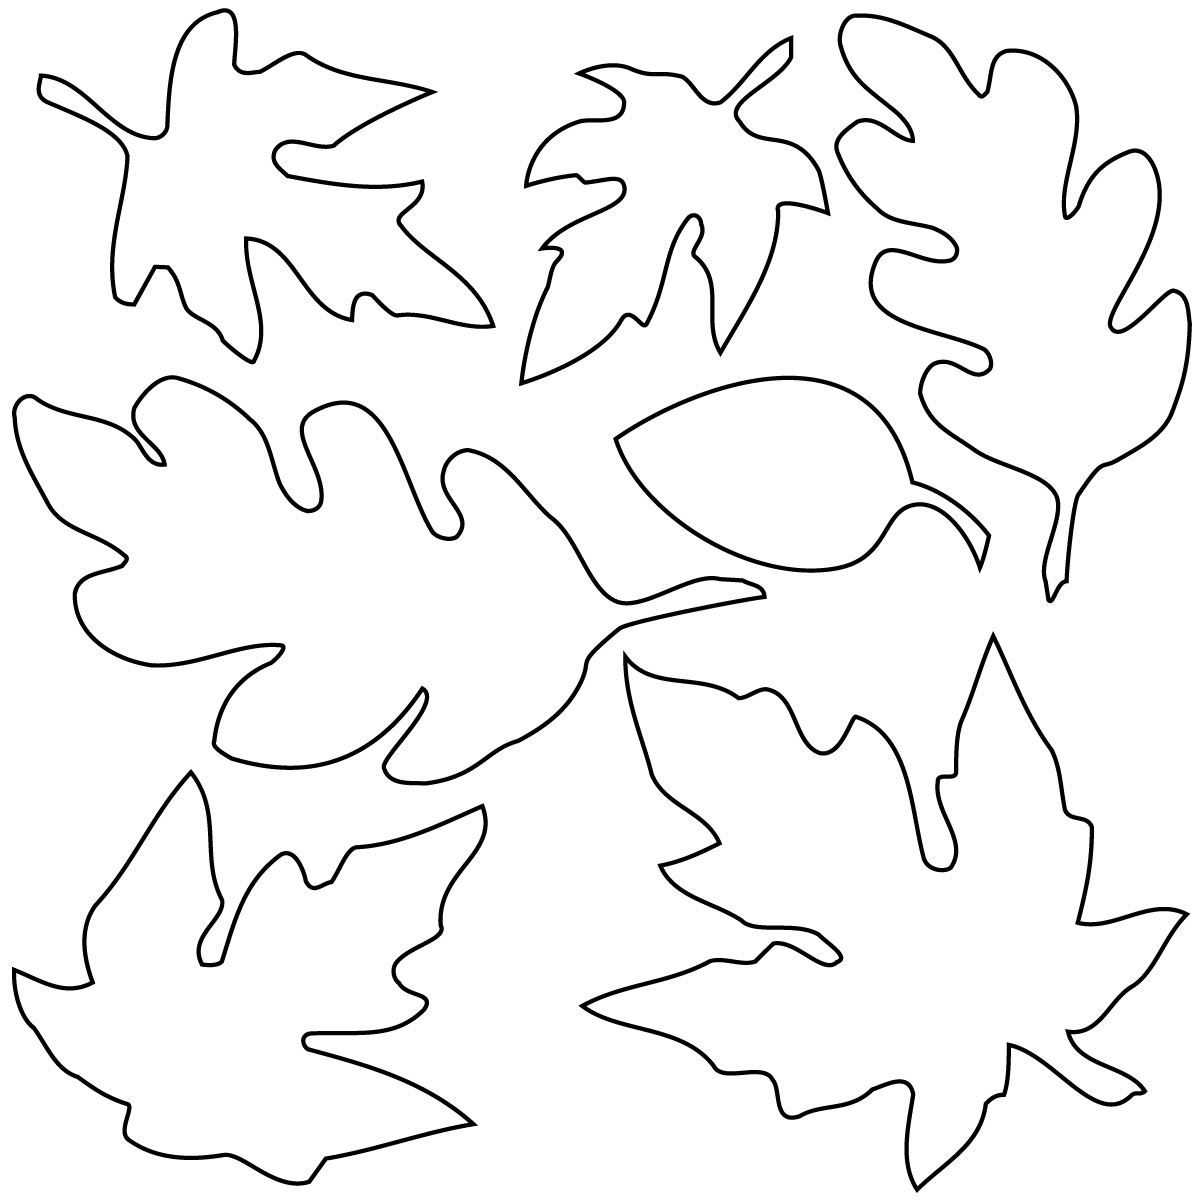 Coloring Fall Leaves Clip Art Image